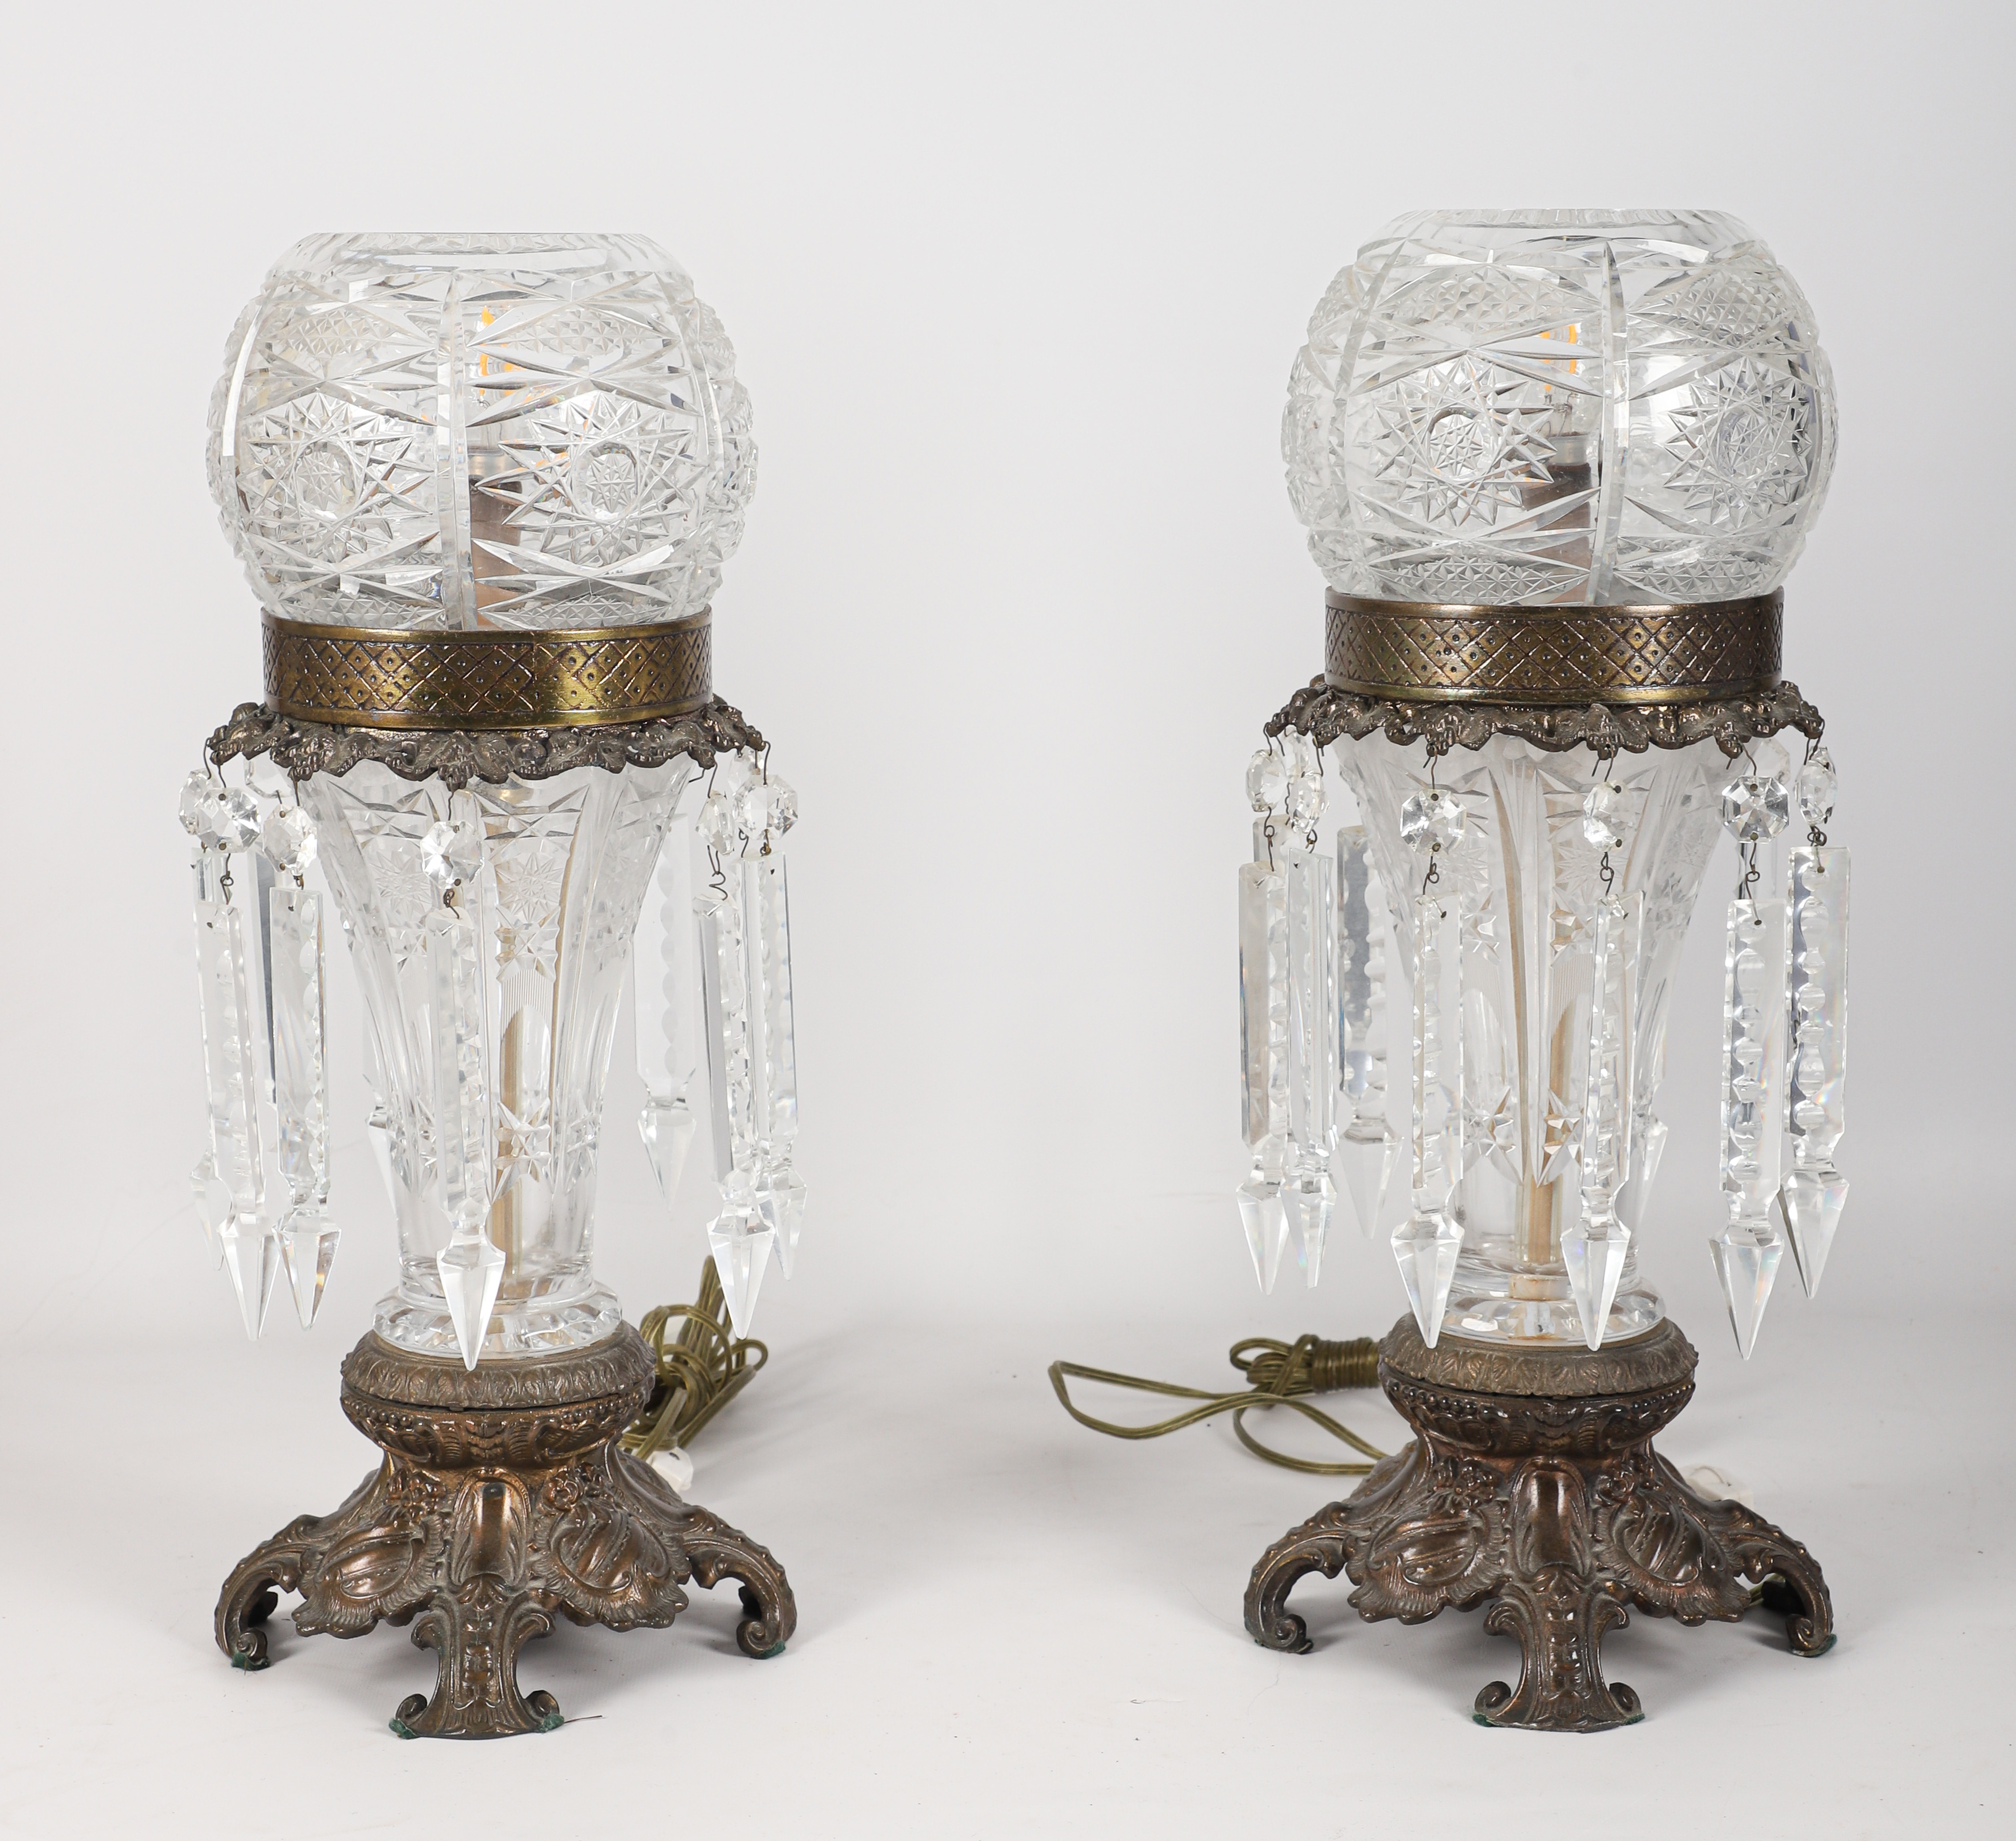 Pair of cut crystal table lamps, flared